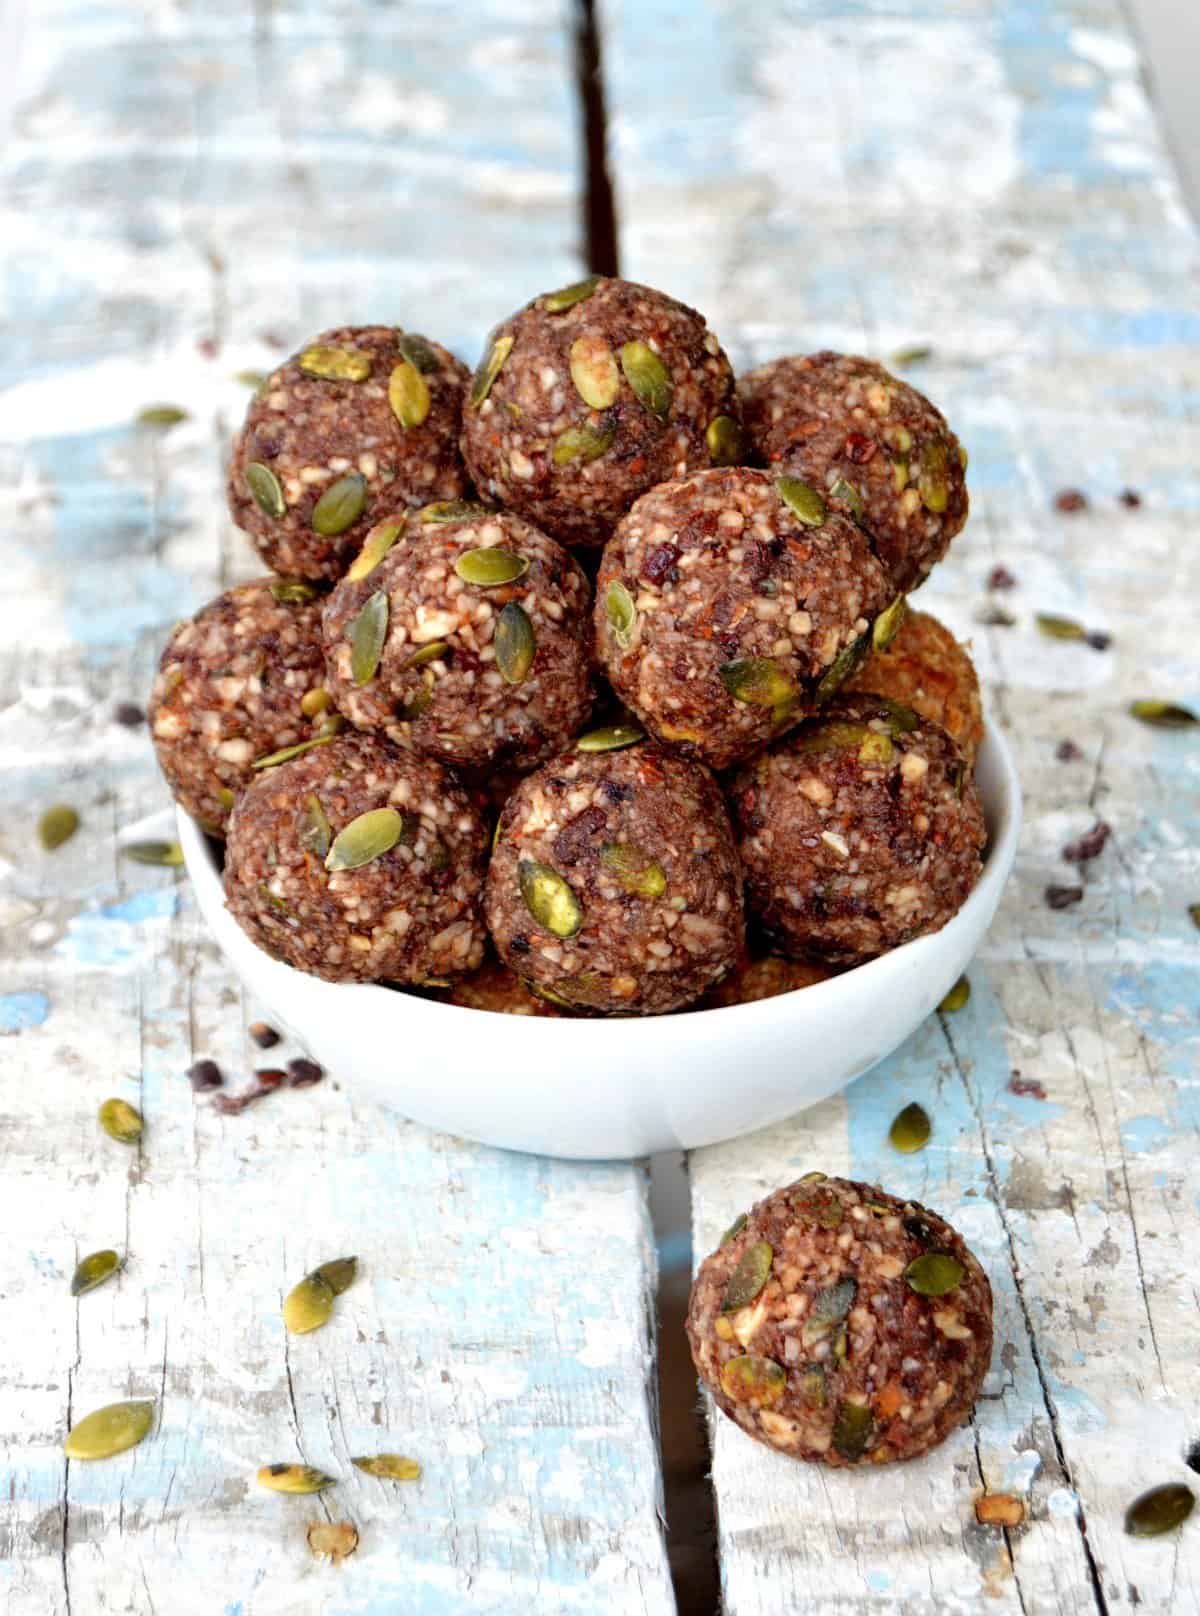 Almond Energy Balls with Dried Fruits